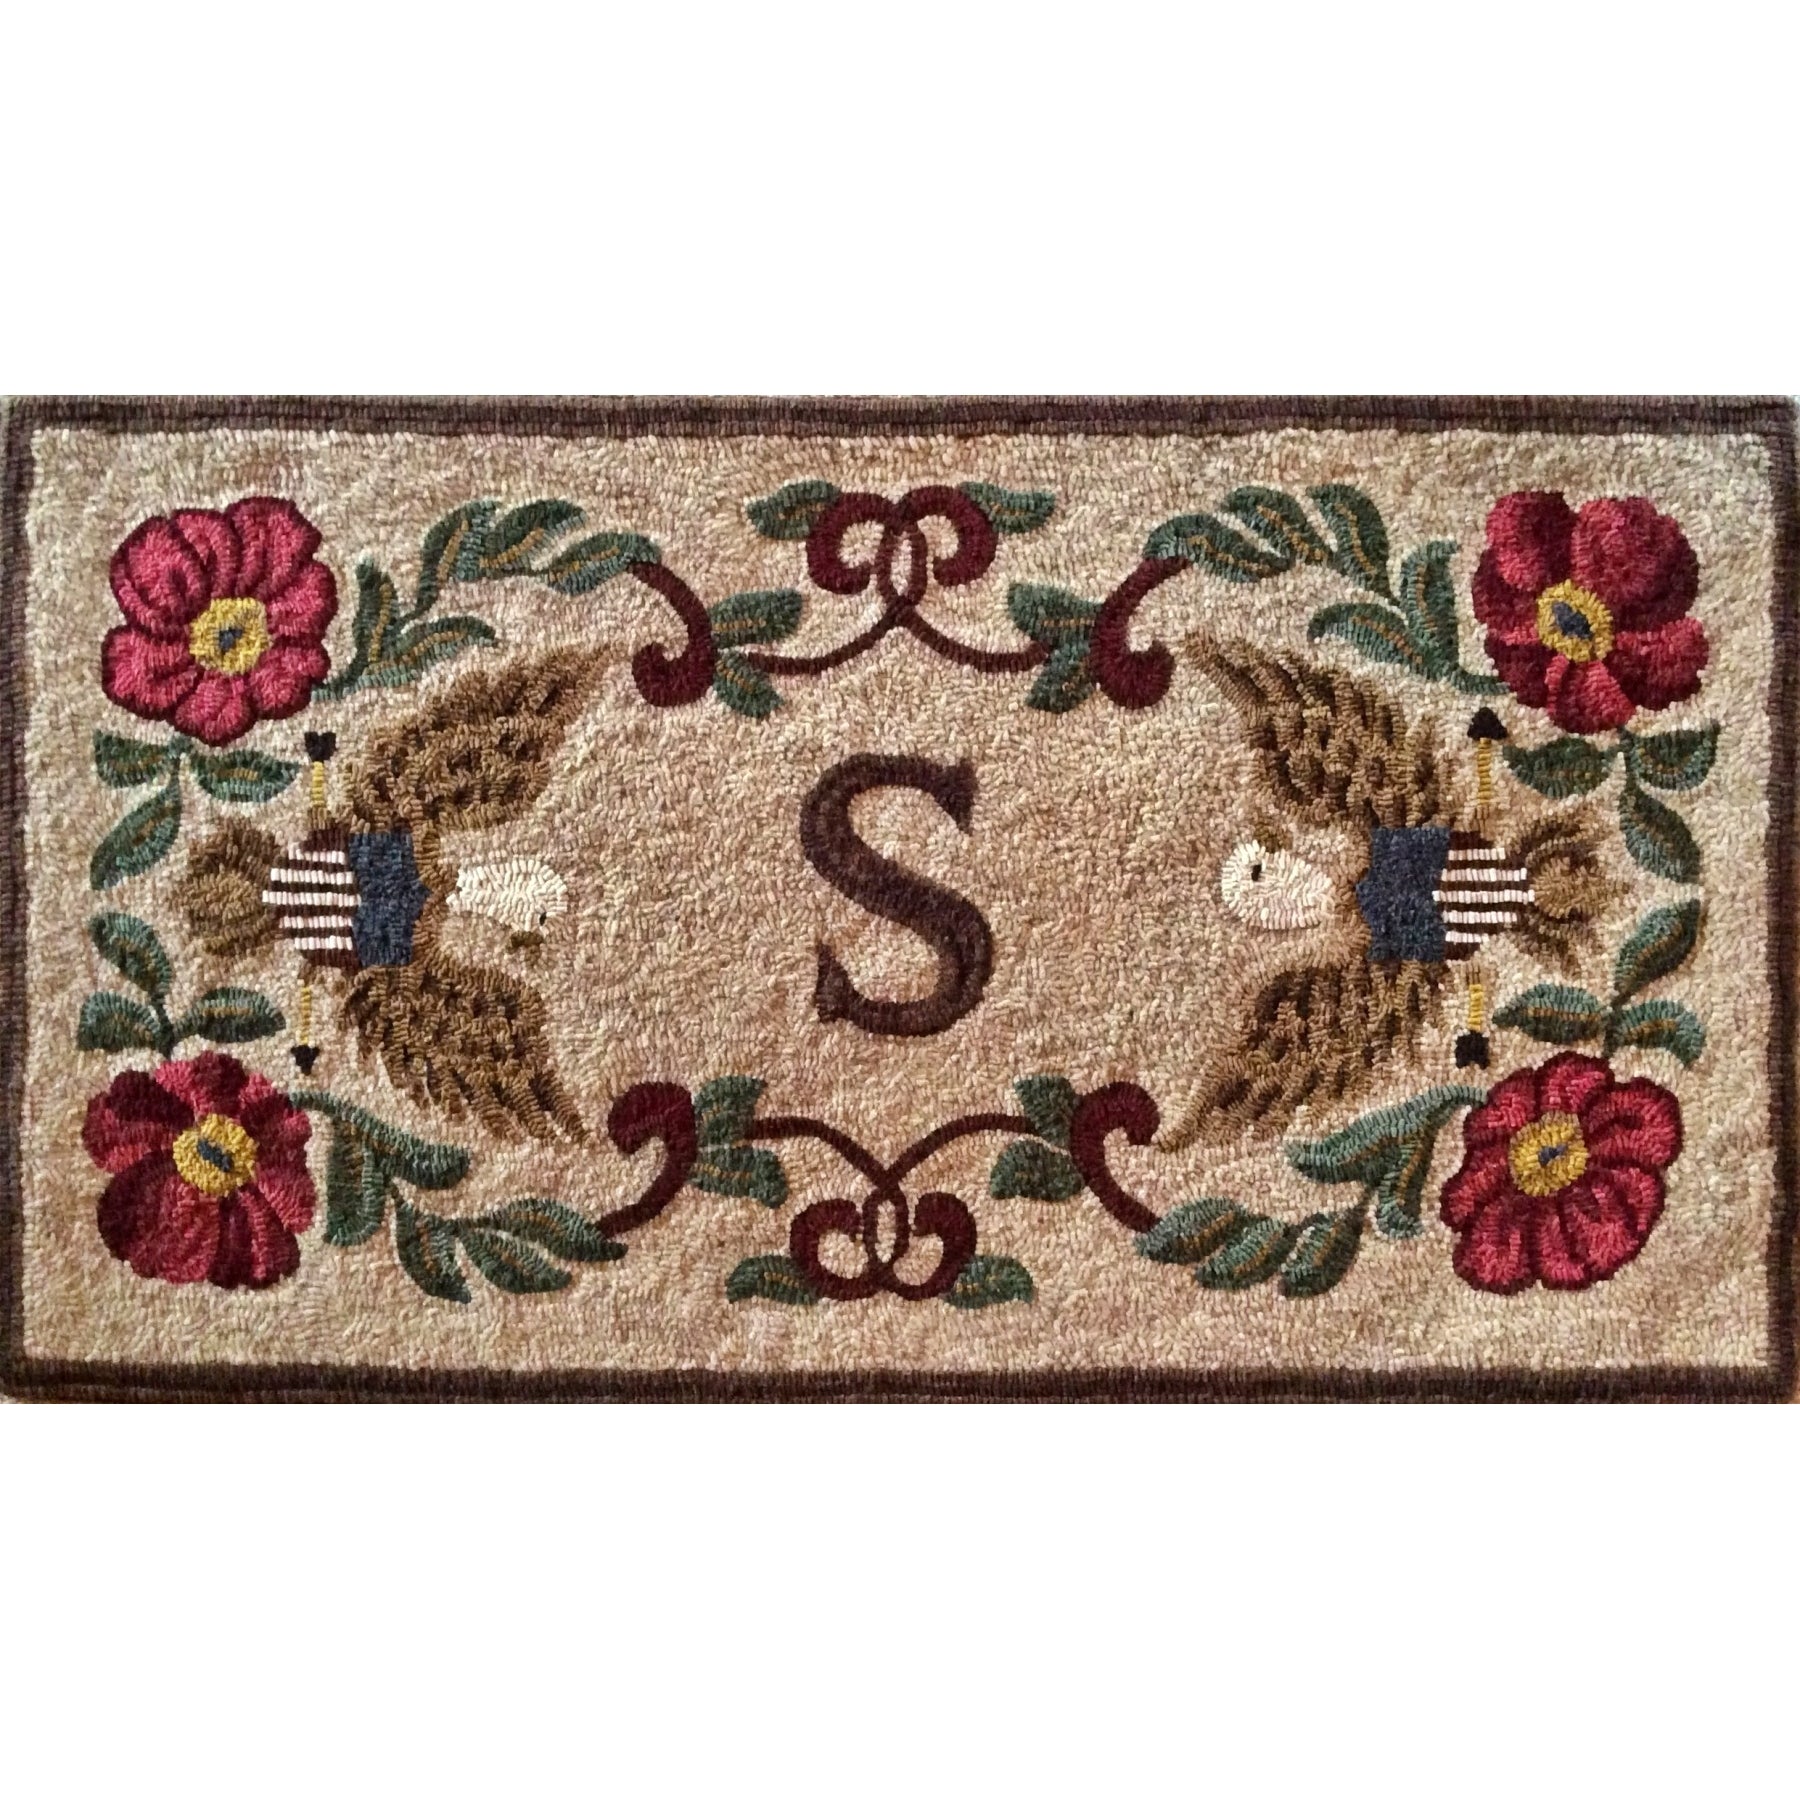 Centennial Legacy, rug hooked by Sherry Sayles